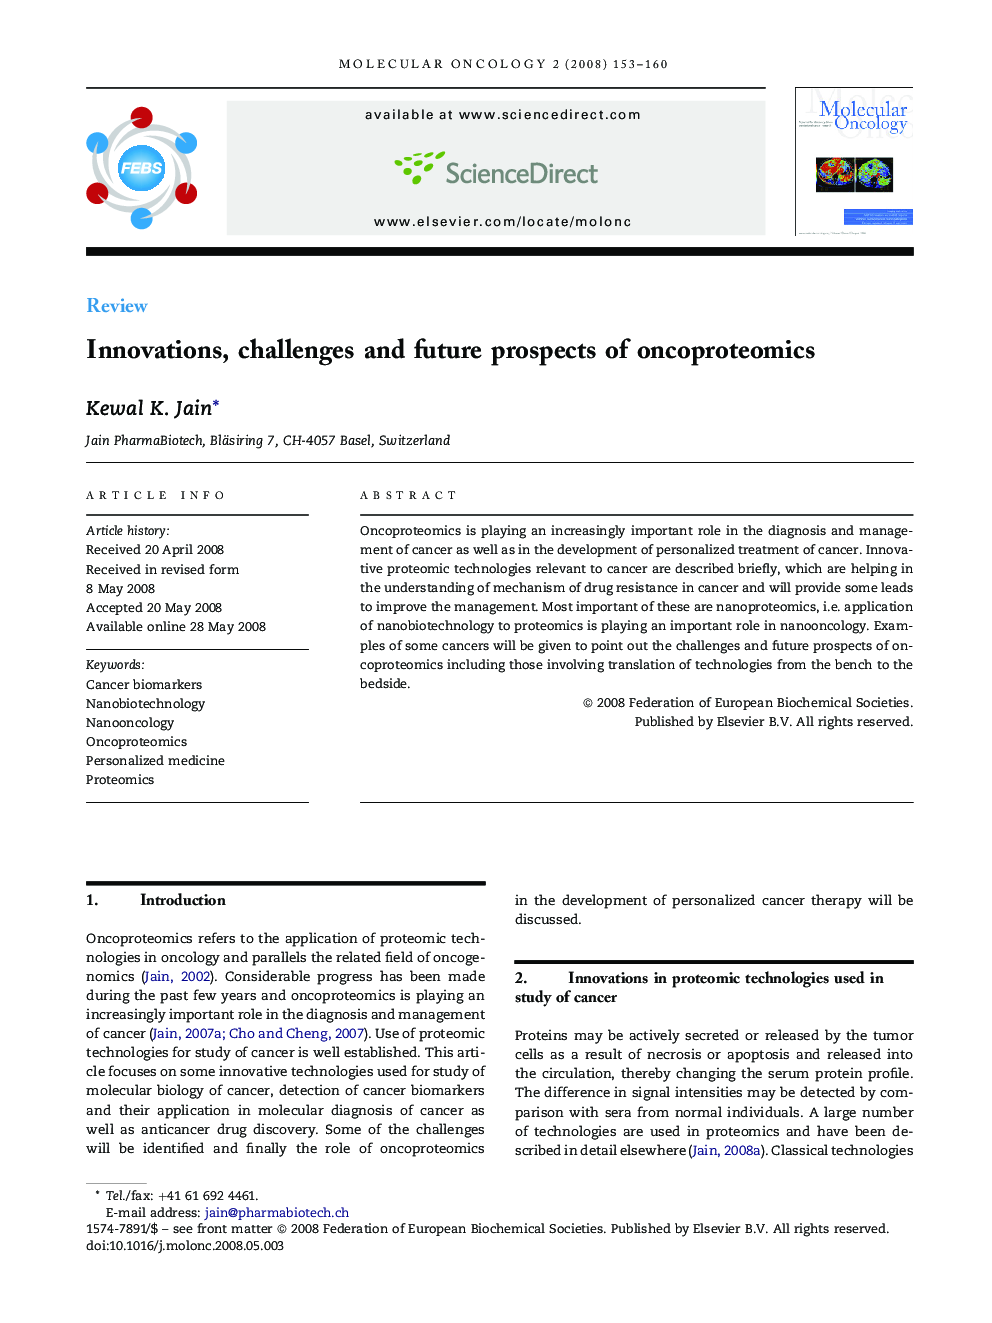 Innovations, challenges and future prospects of oncoproteomics